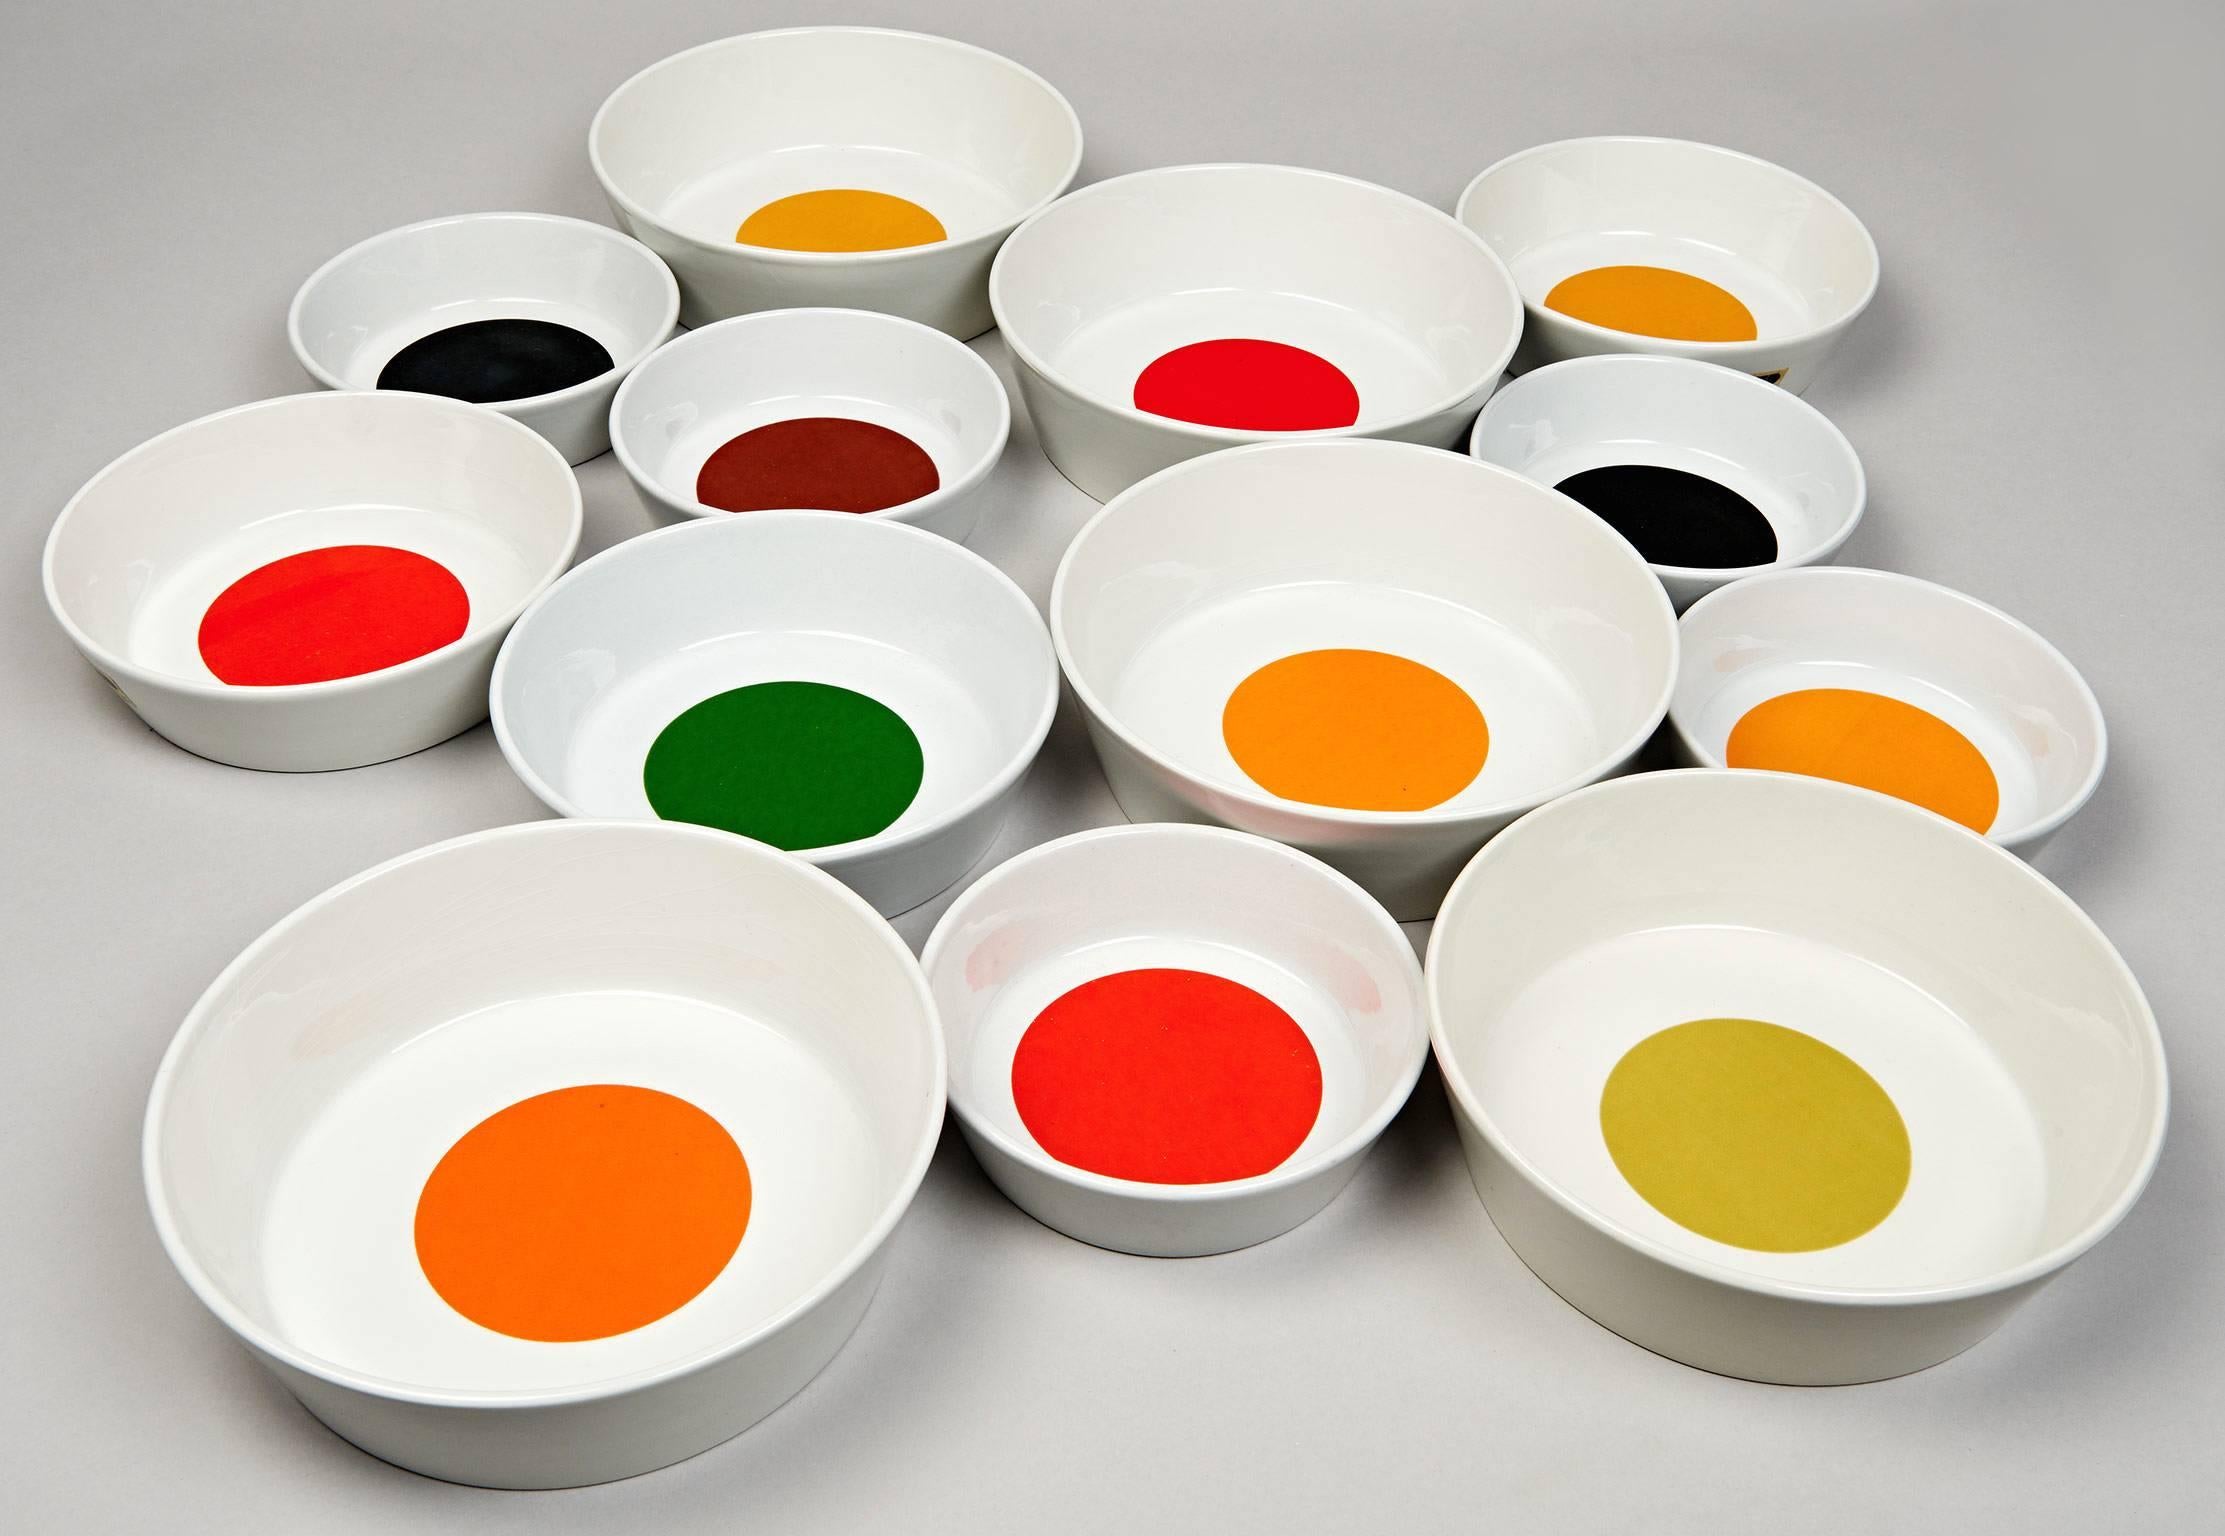 These 13 porcelain bowls are each decorated with a roundel of pure color. Designed by Gio Ponti and produced by Ceramica Franco Pozzi in the late 1960s, these bowls, especially when displayed together have the appeal of minimalist art. This